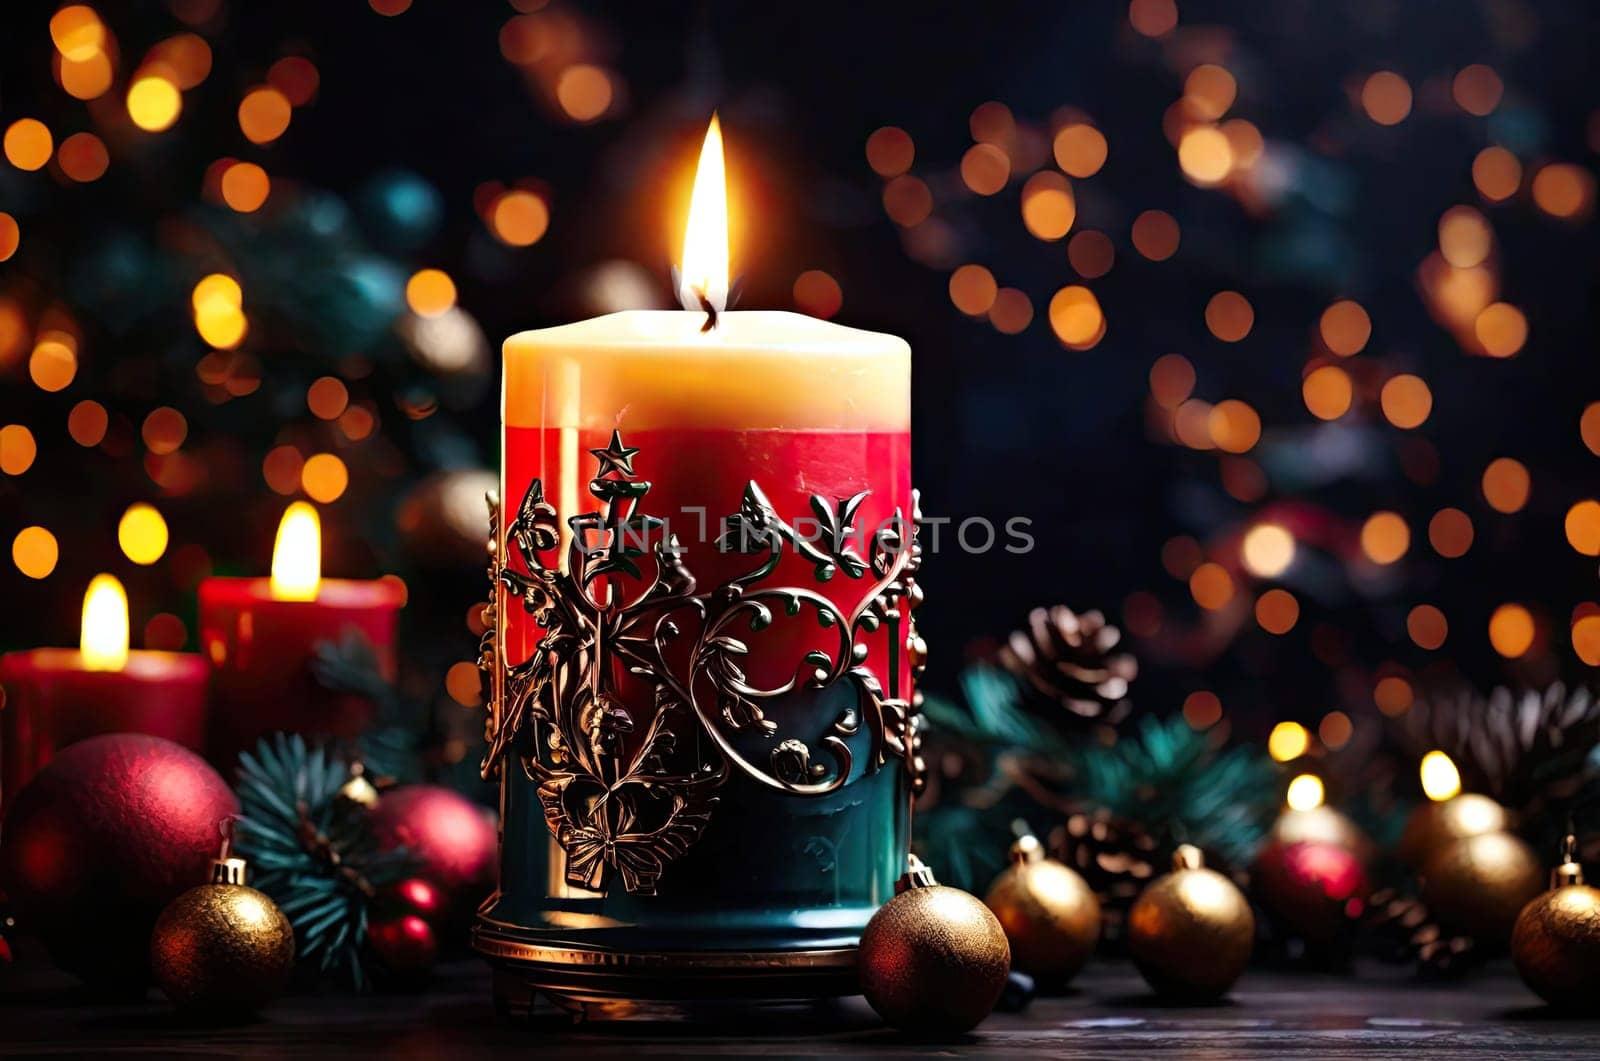 Christmas and New Year Holiday design by Ladouski